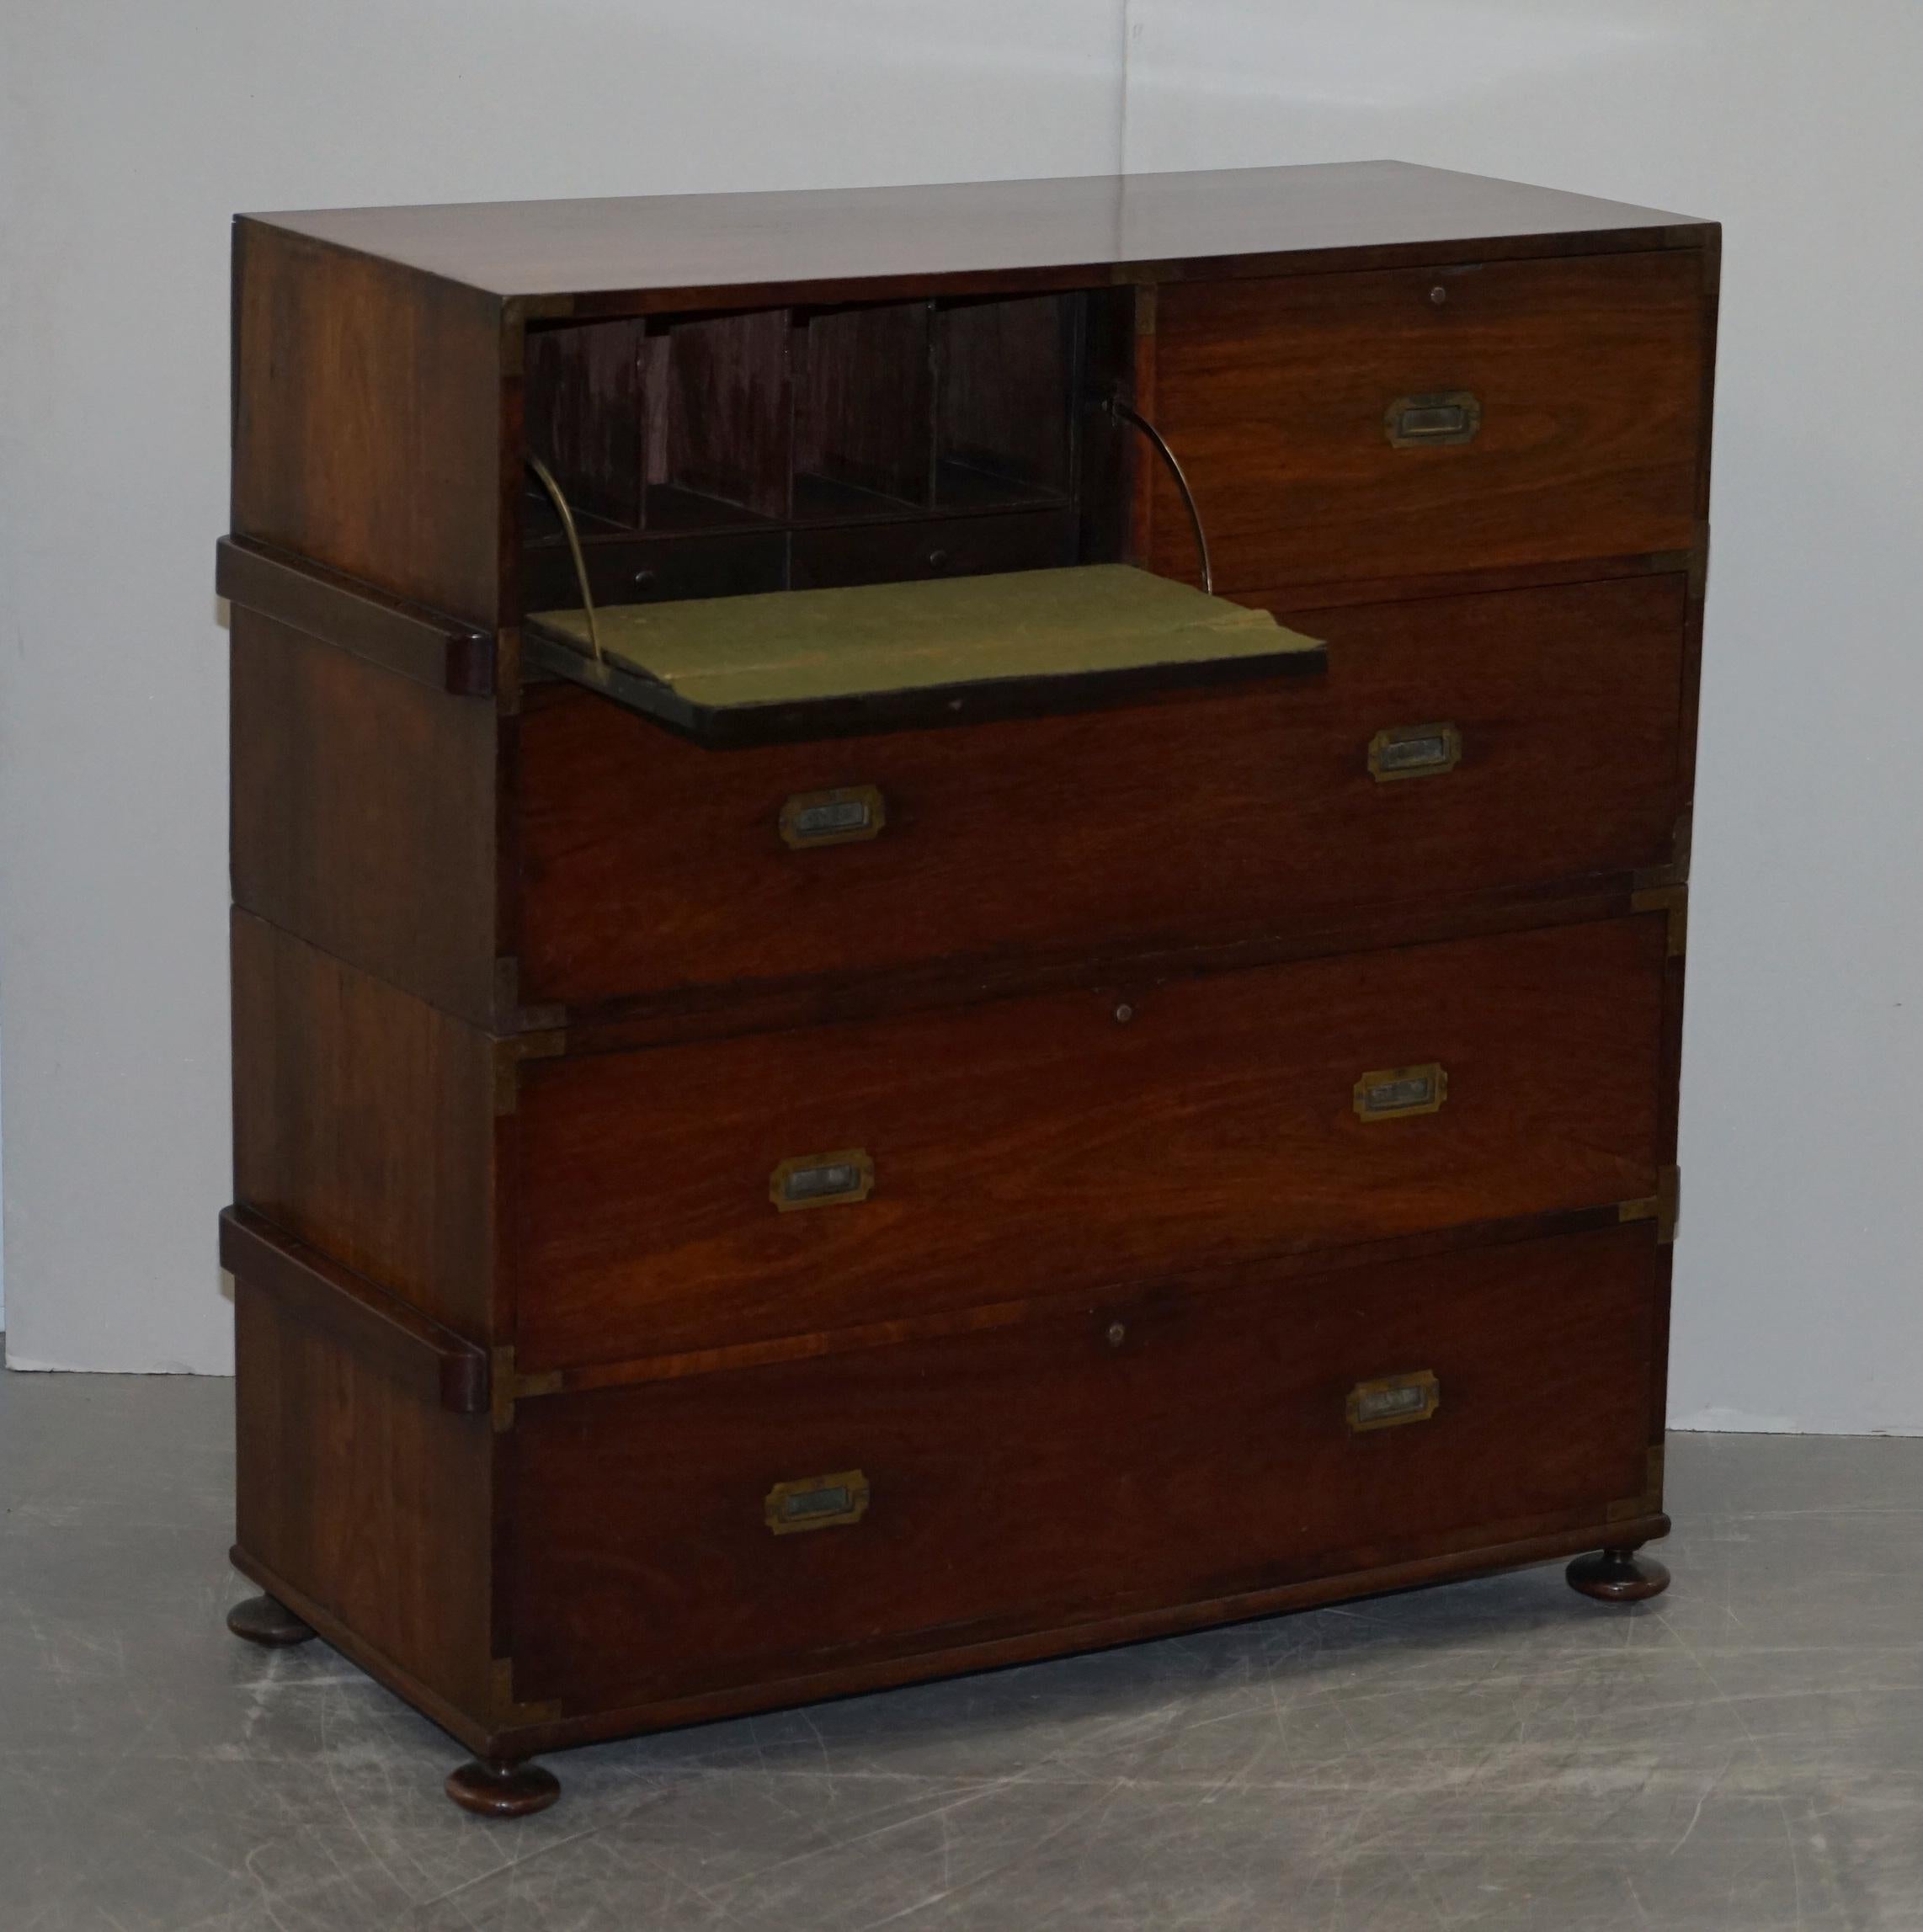 Restored 1876 Stamped Camphor Wood Military Campaign Chest of Drawers with Desk 6